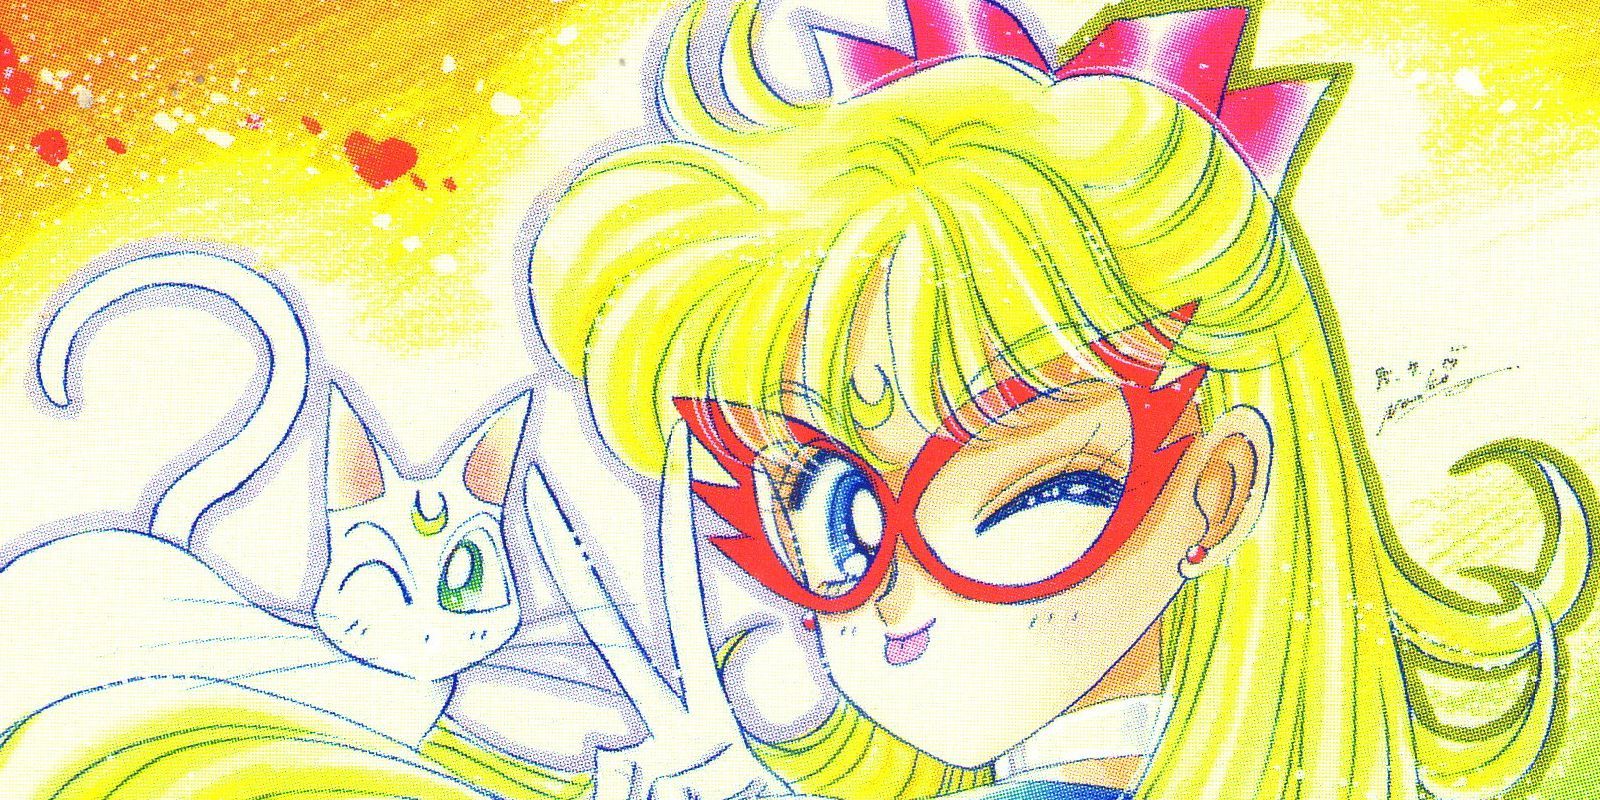 Comic Frontline: Idea for Re-released Sailor Moon Manga reviews?